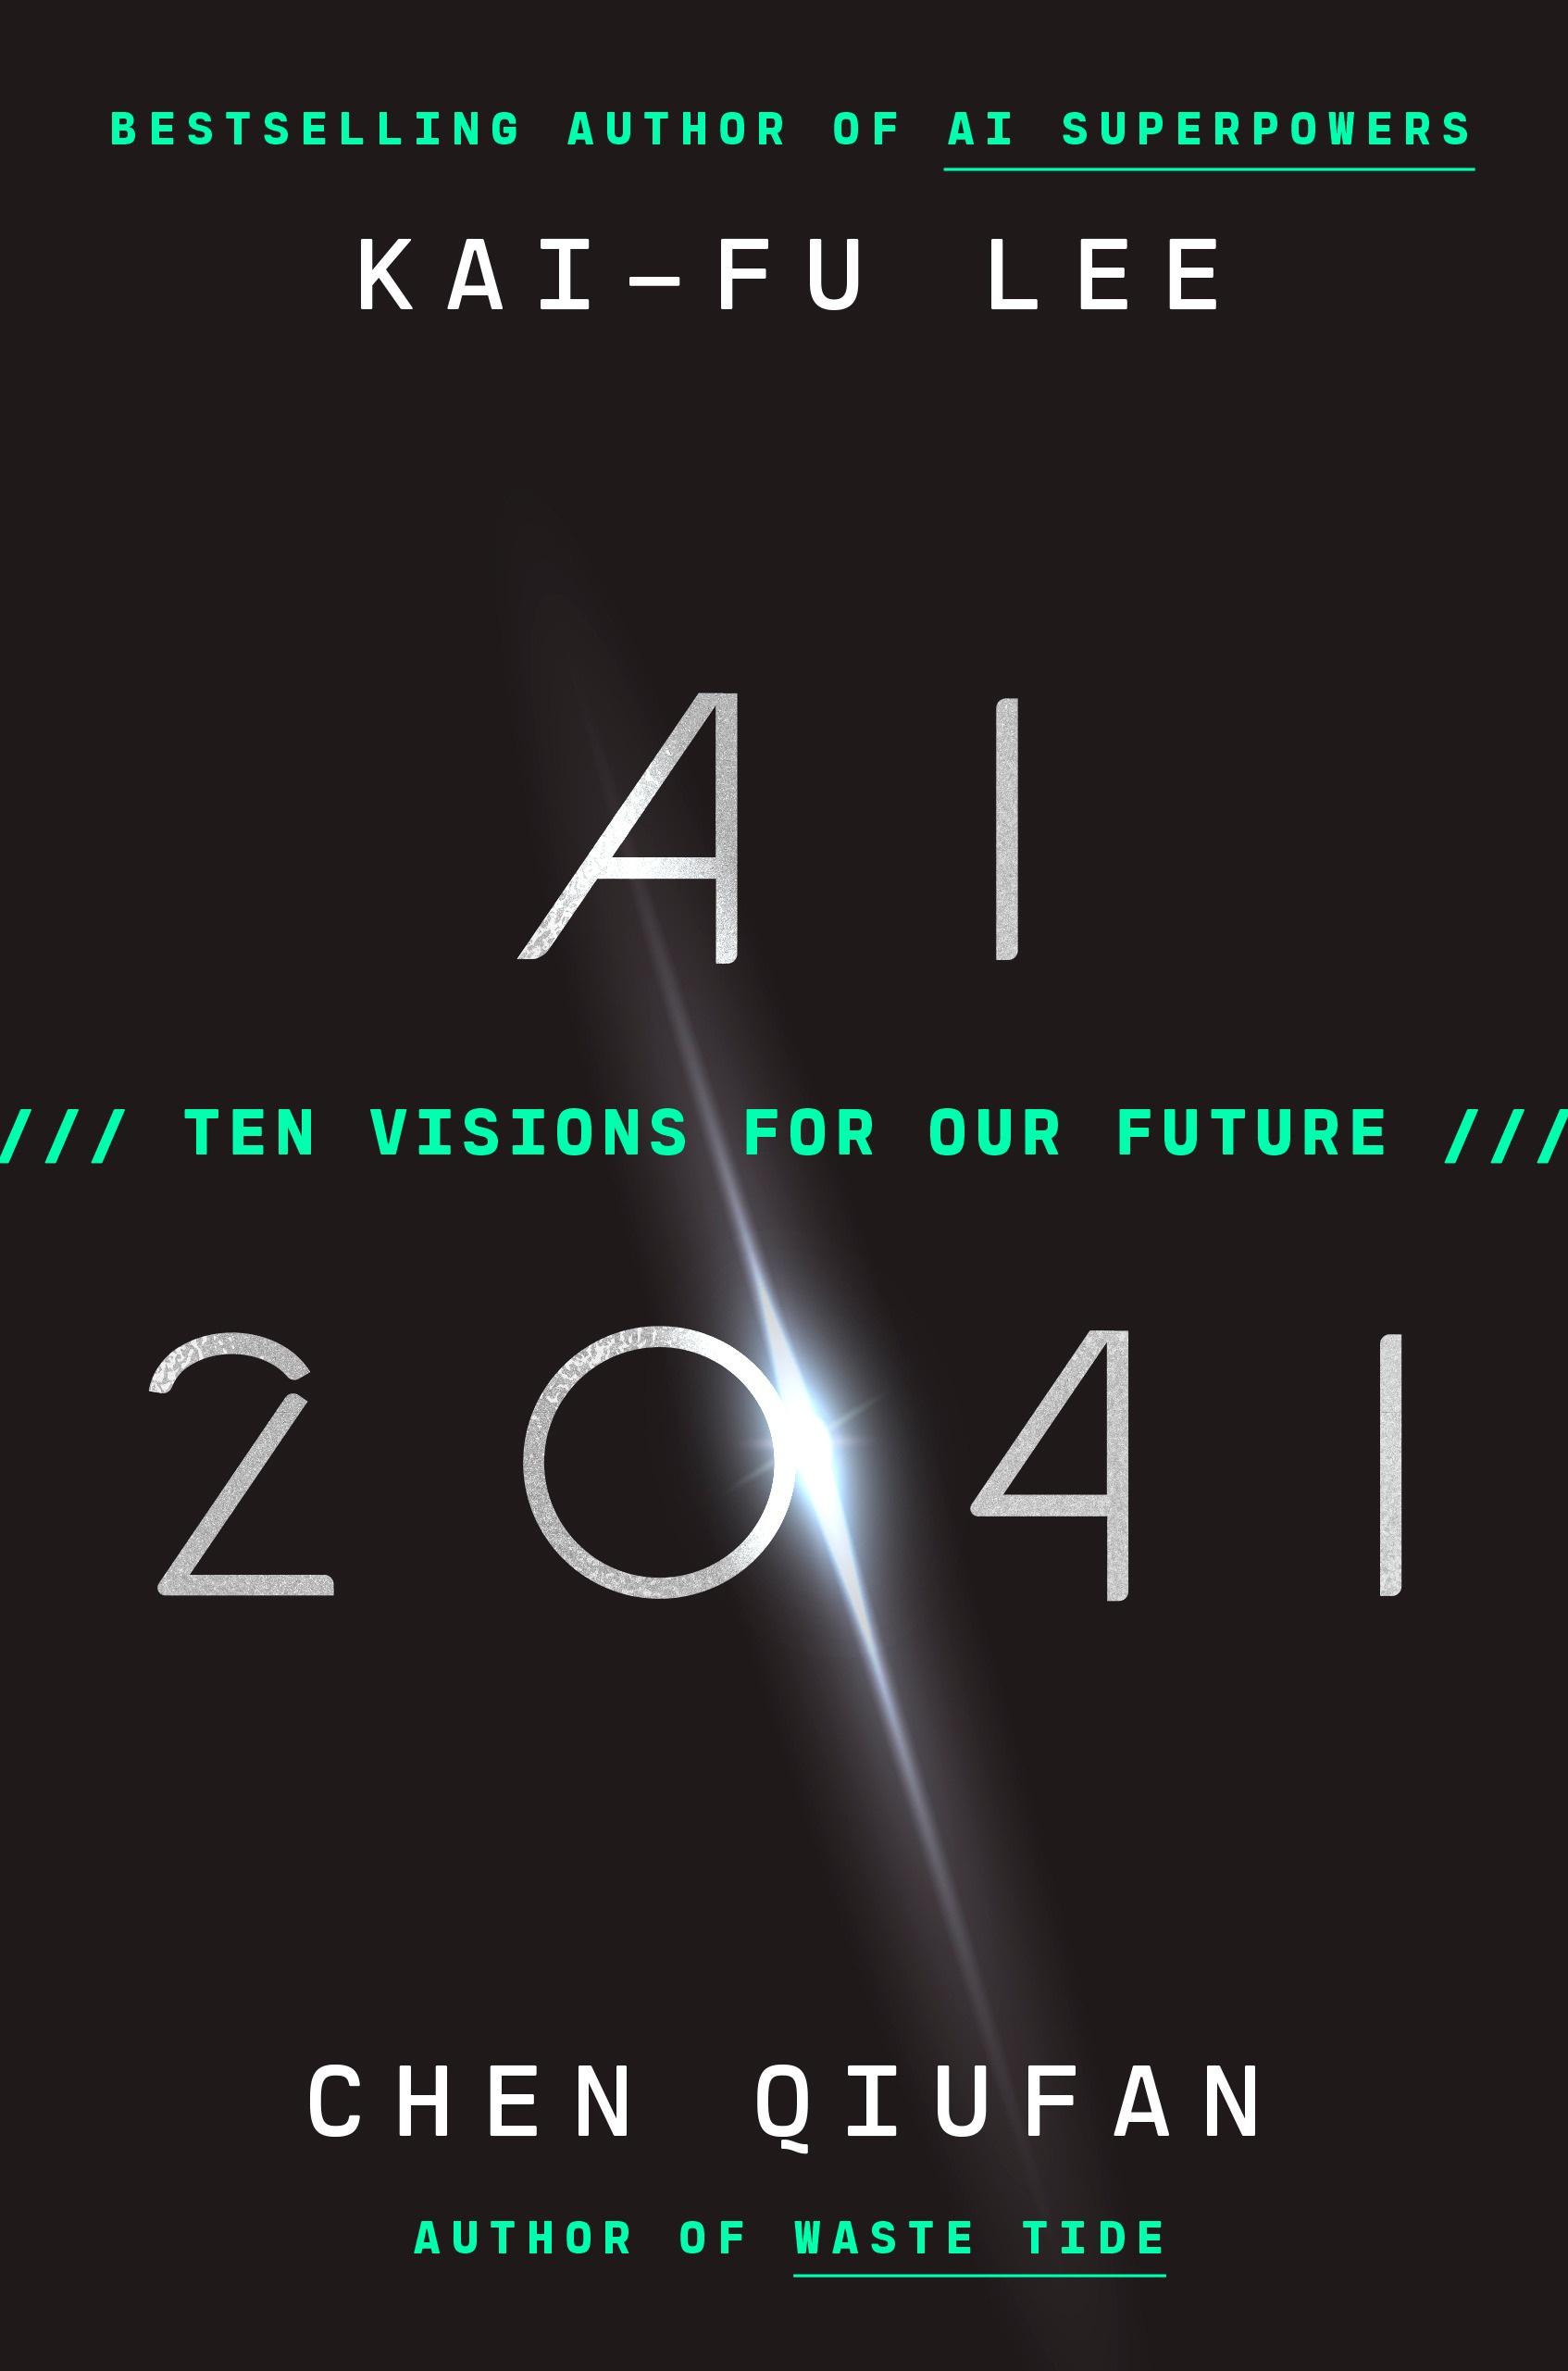 Read an Excerpt From Kai-Fu Lee's New Book, 'AI 2041' | Time